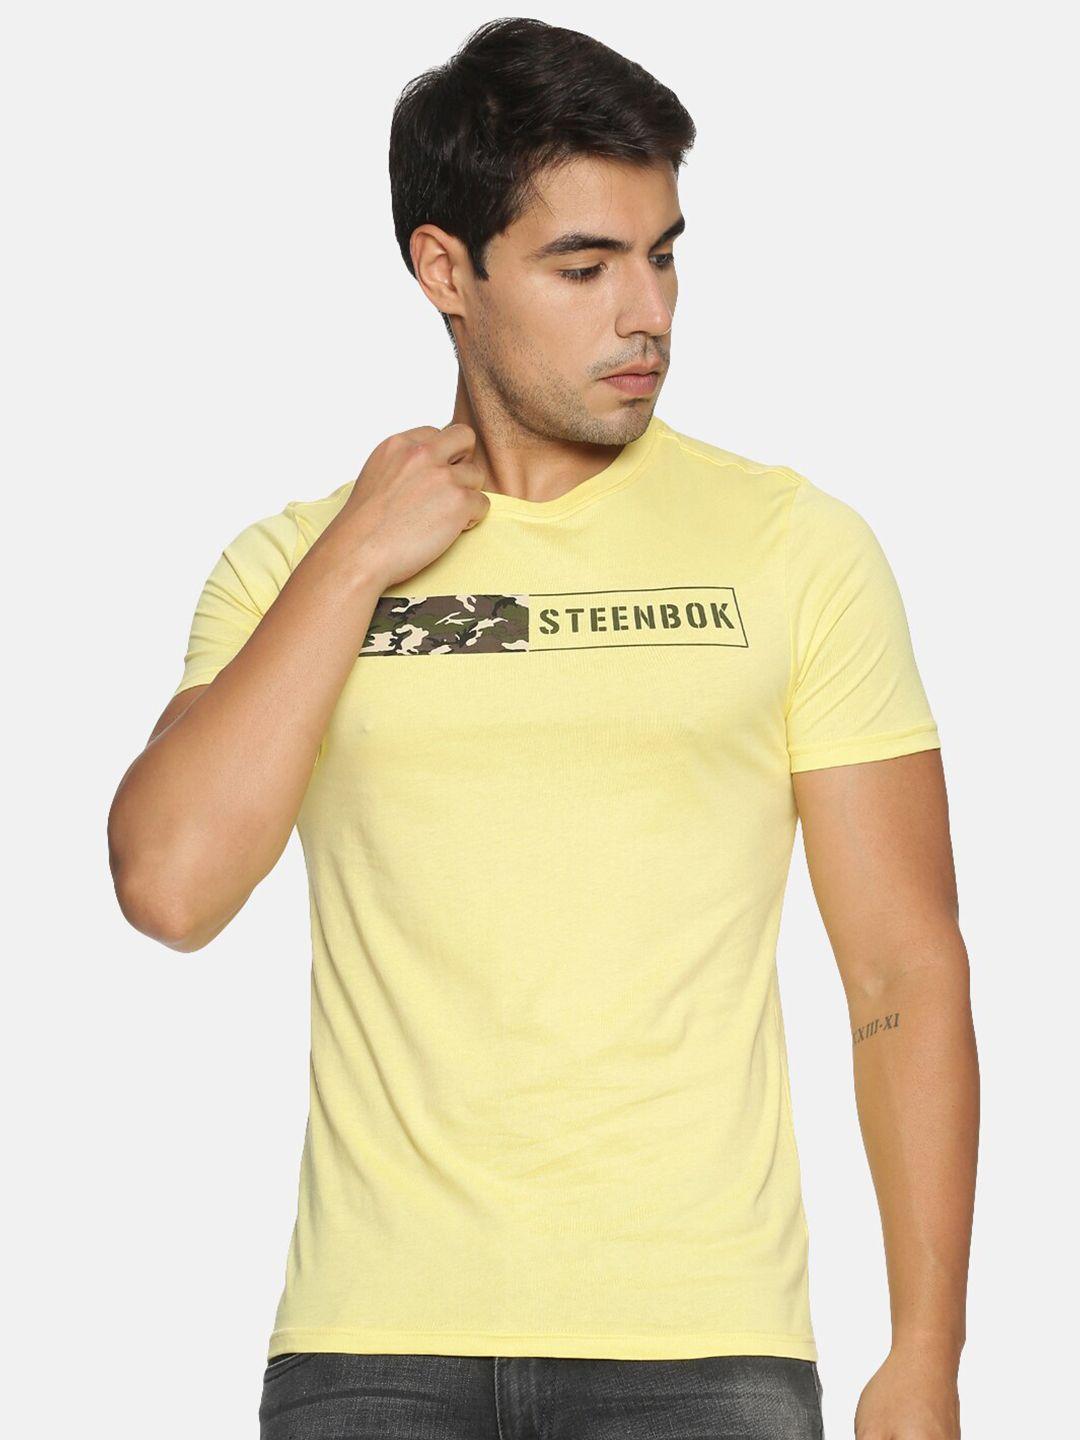 steenbok typography printed slim fit pure cotton t-shirt